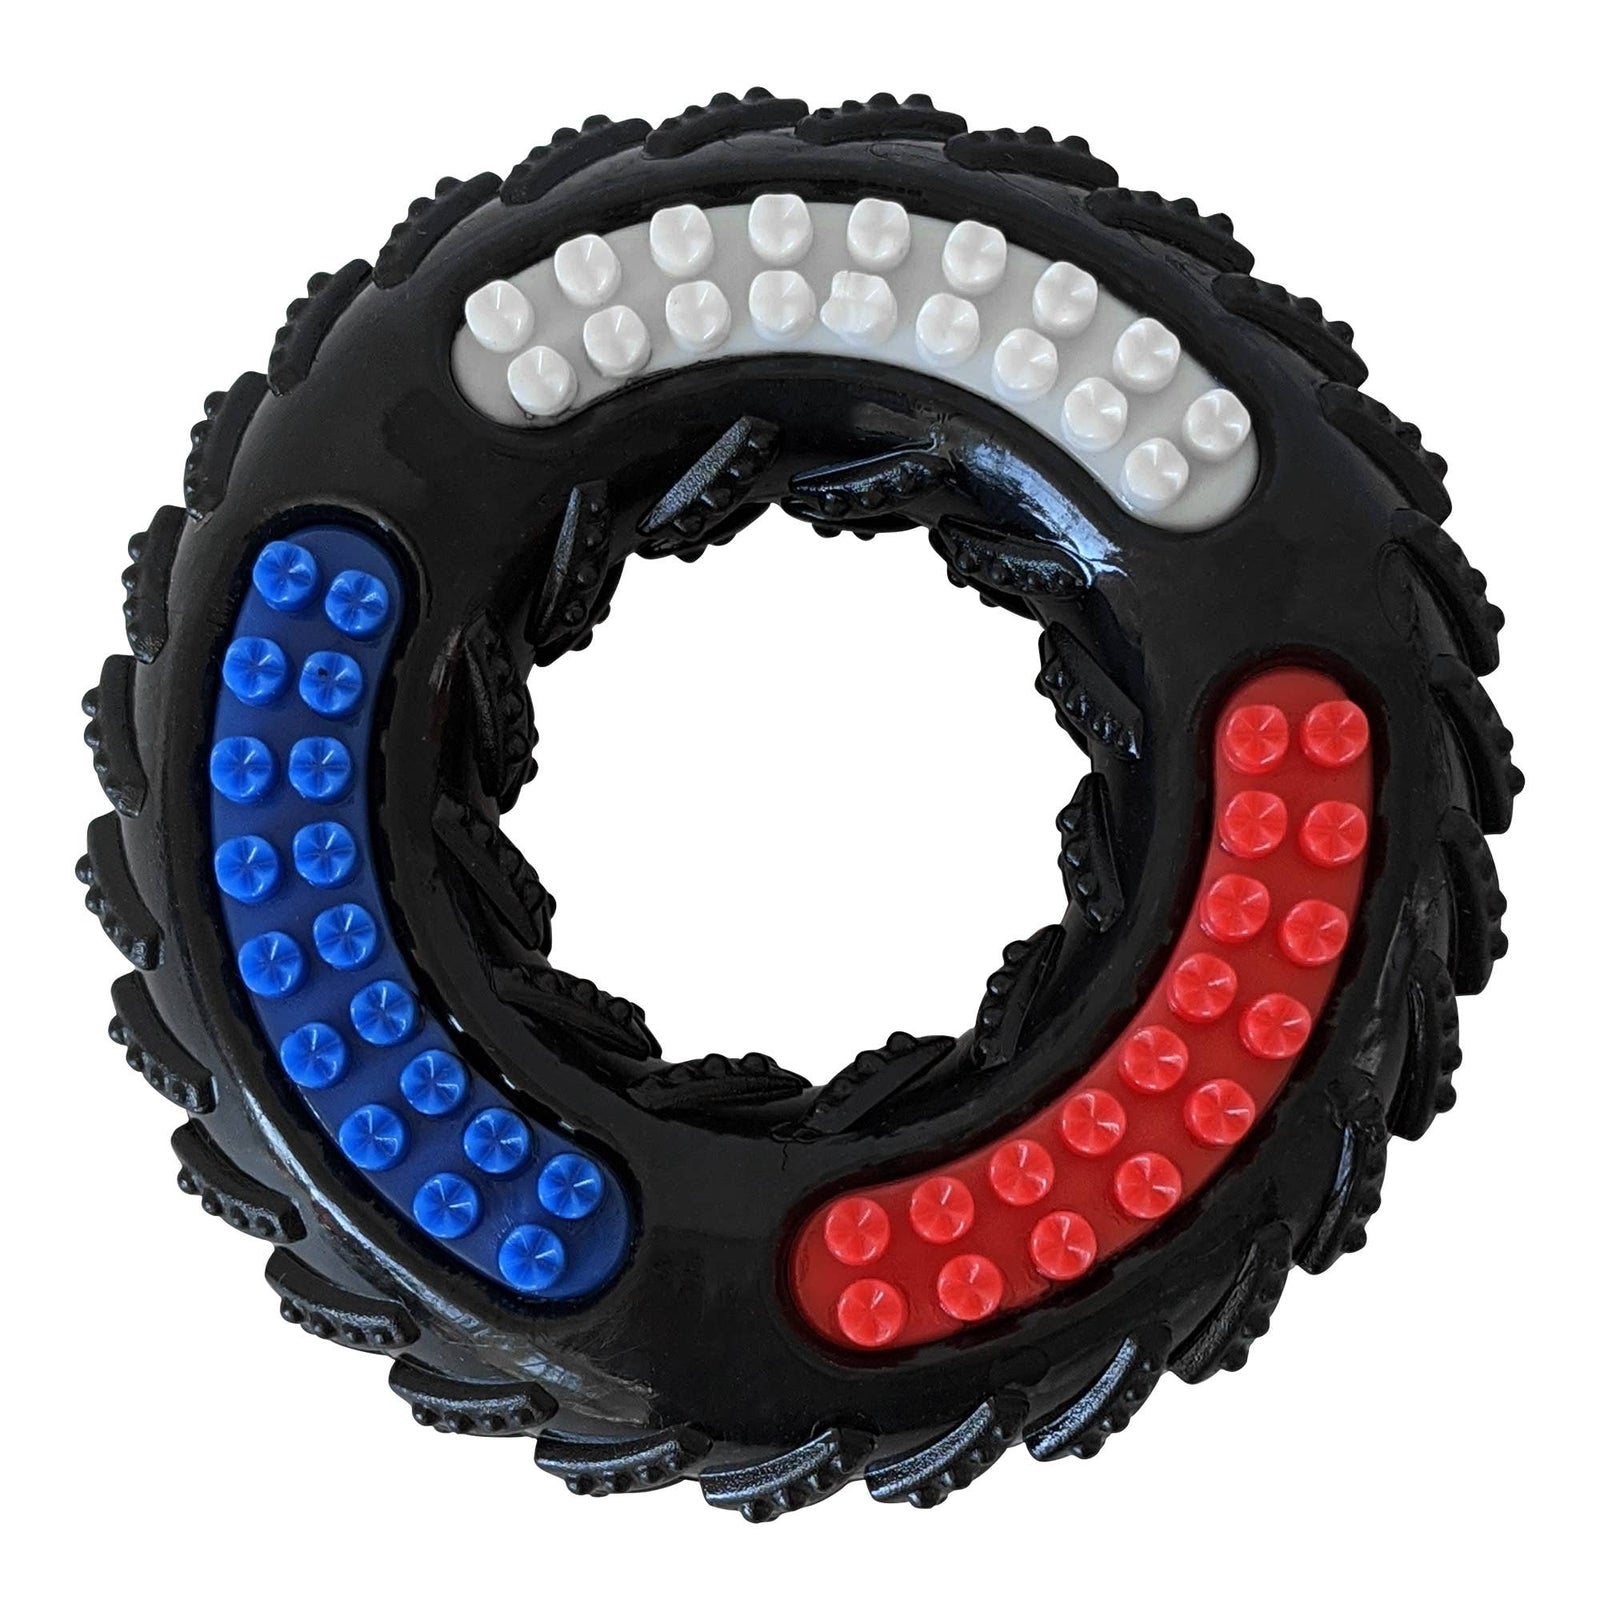 TPR Textured Dog Chew Toy - "Tire of Fun"